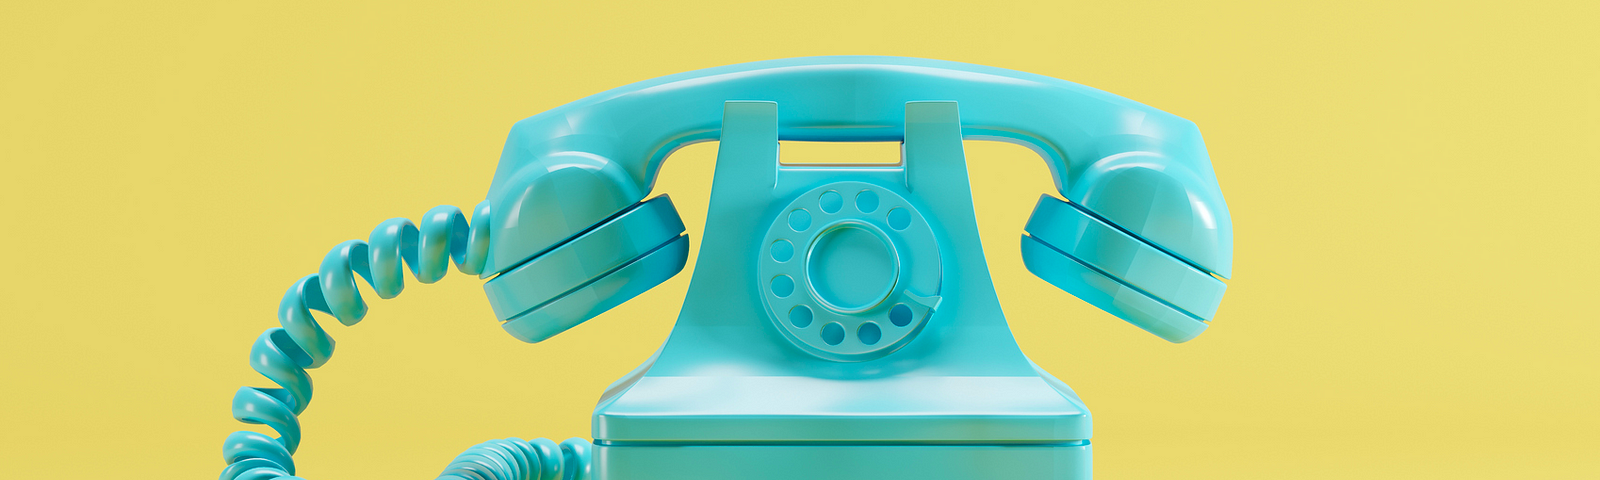 A photo of a teal old-fashioned phone against a yellow background.